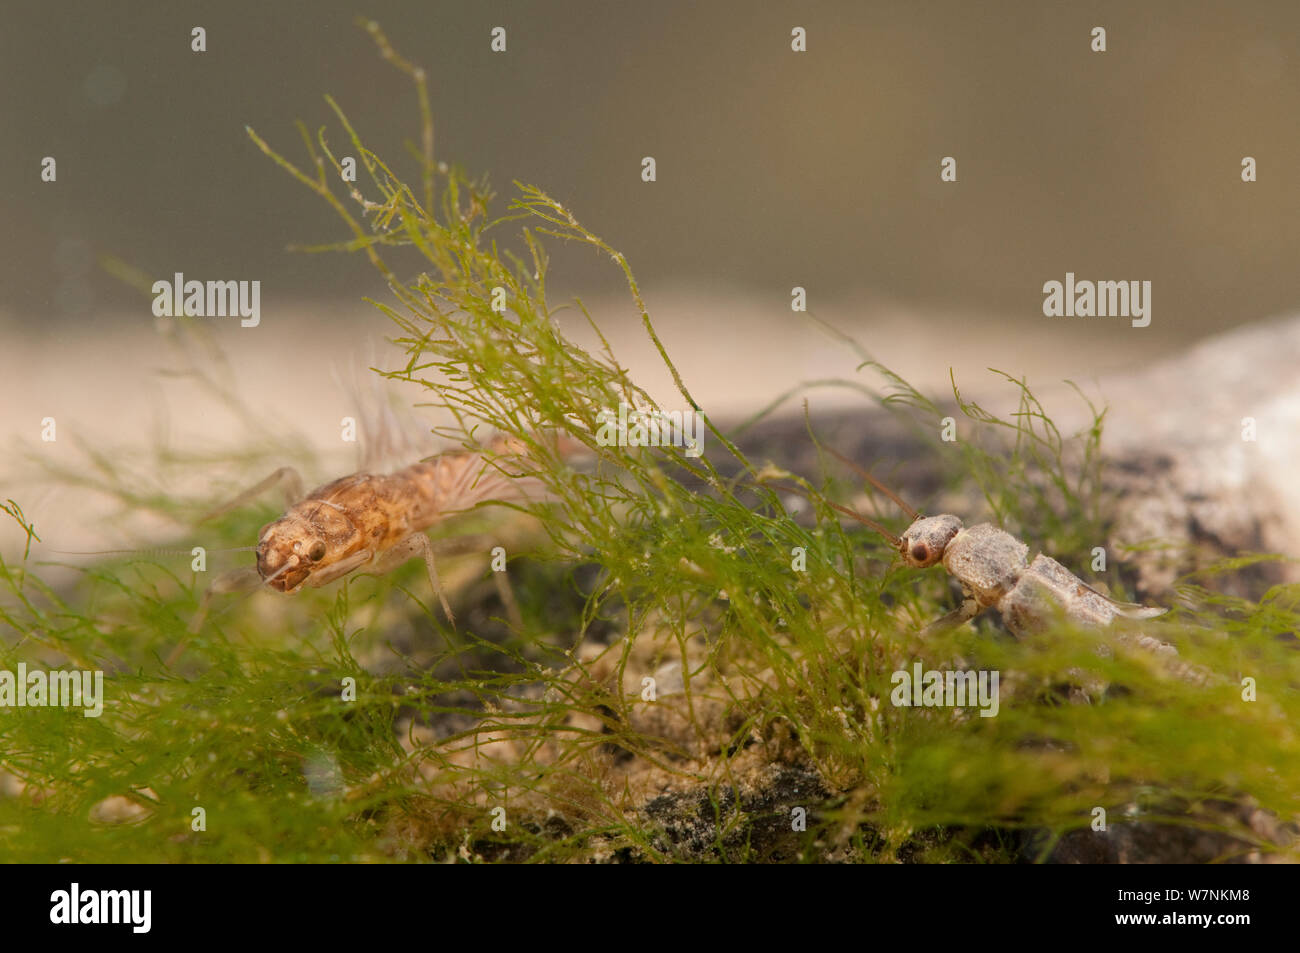 Prong-gilled mayfly nymph (Leptophlebiidae) and Stonefly nymph (Plecoptera), hiding in the algae at the bottom, Europe, April, controlled conditions Stock Photo